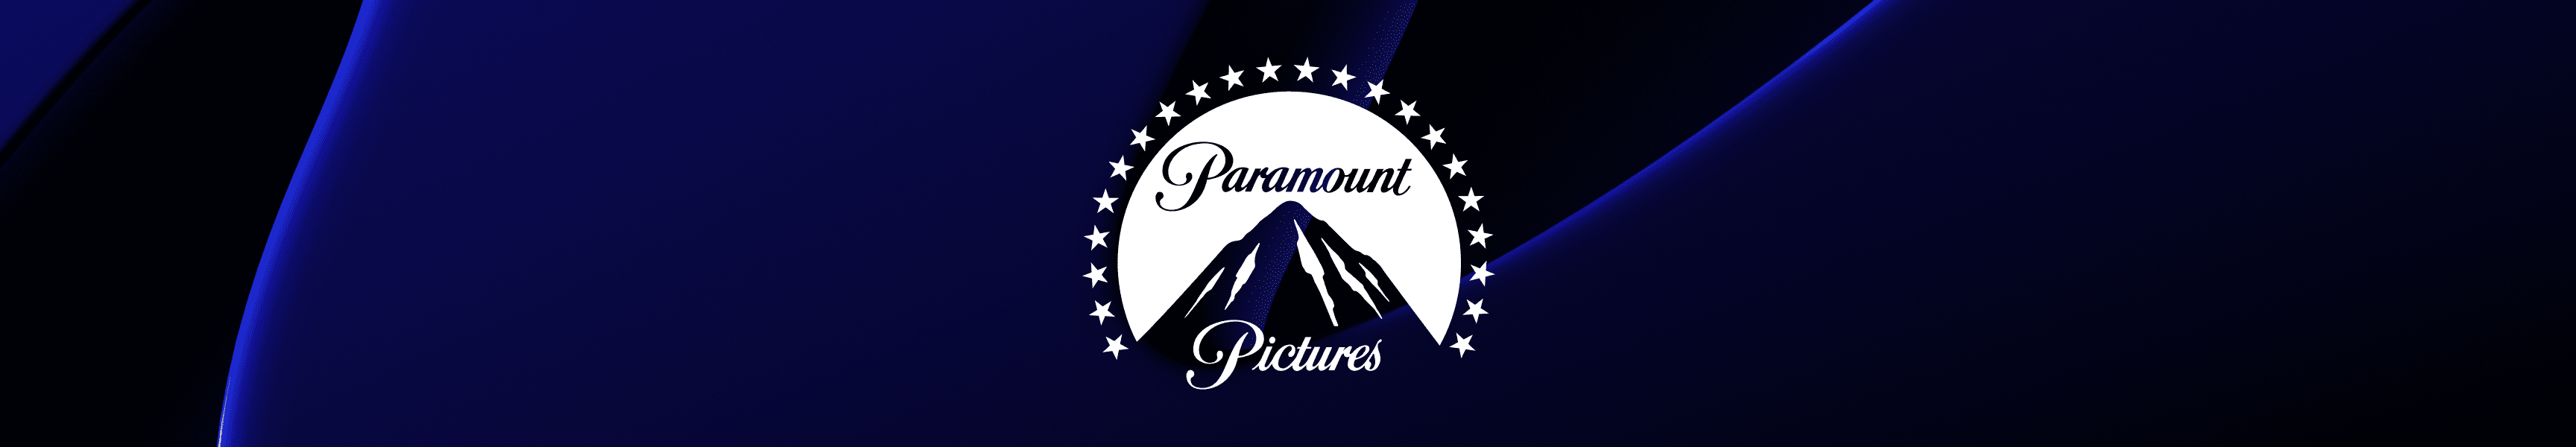 Paramount Pictures Couvertures